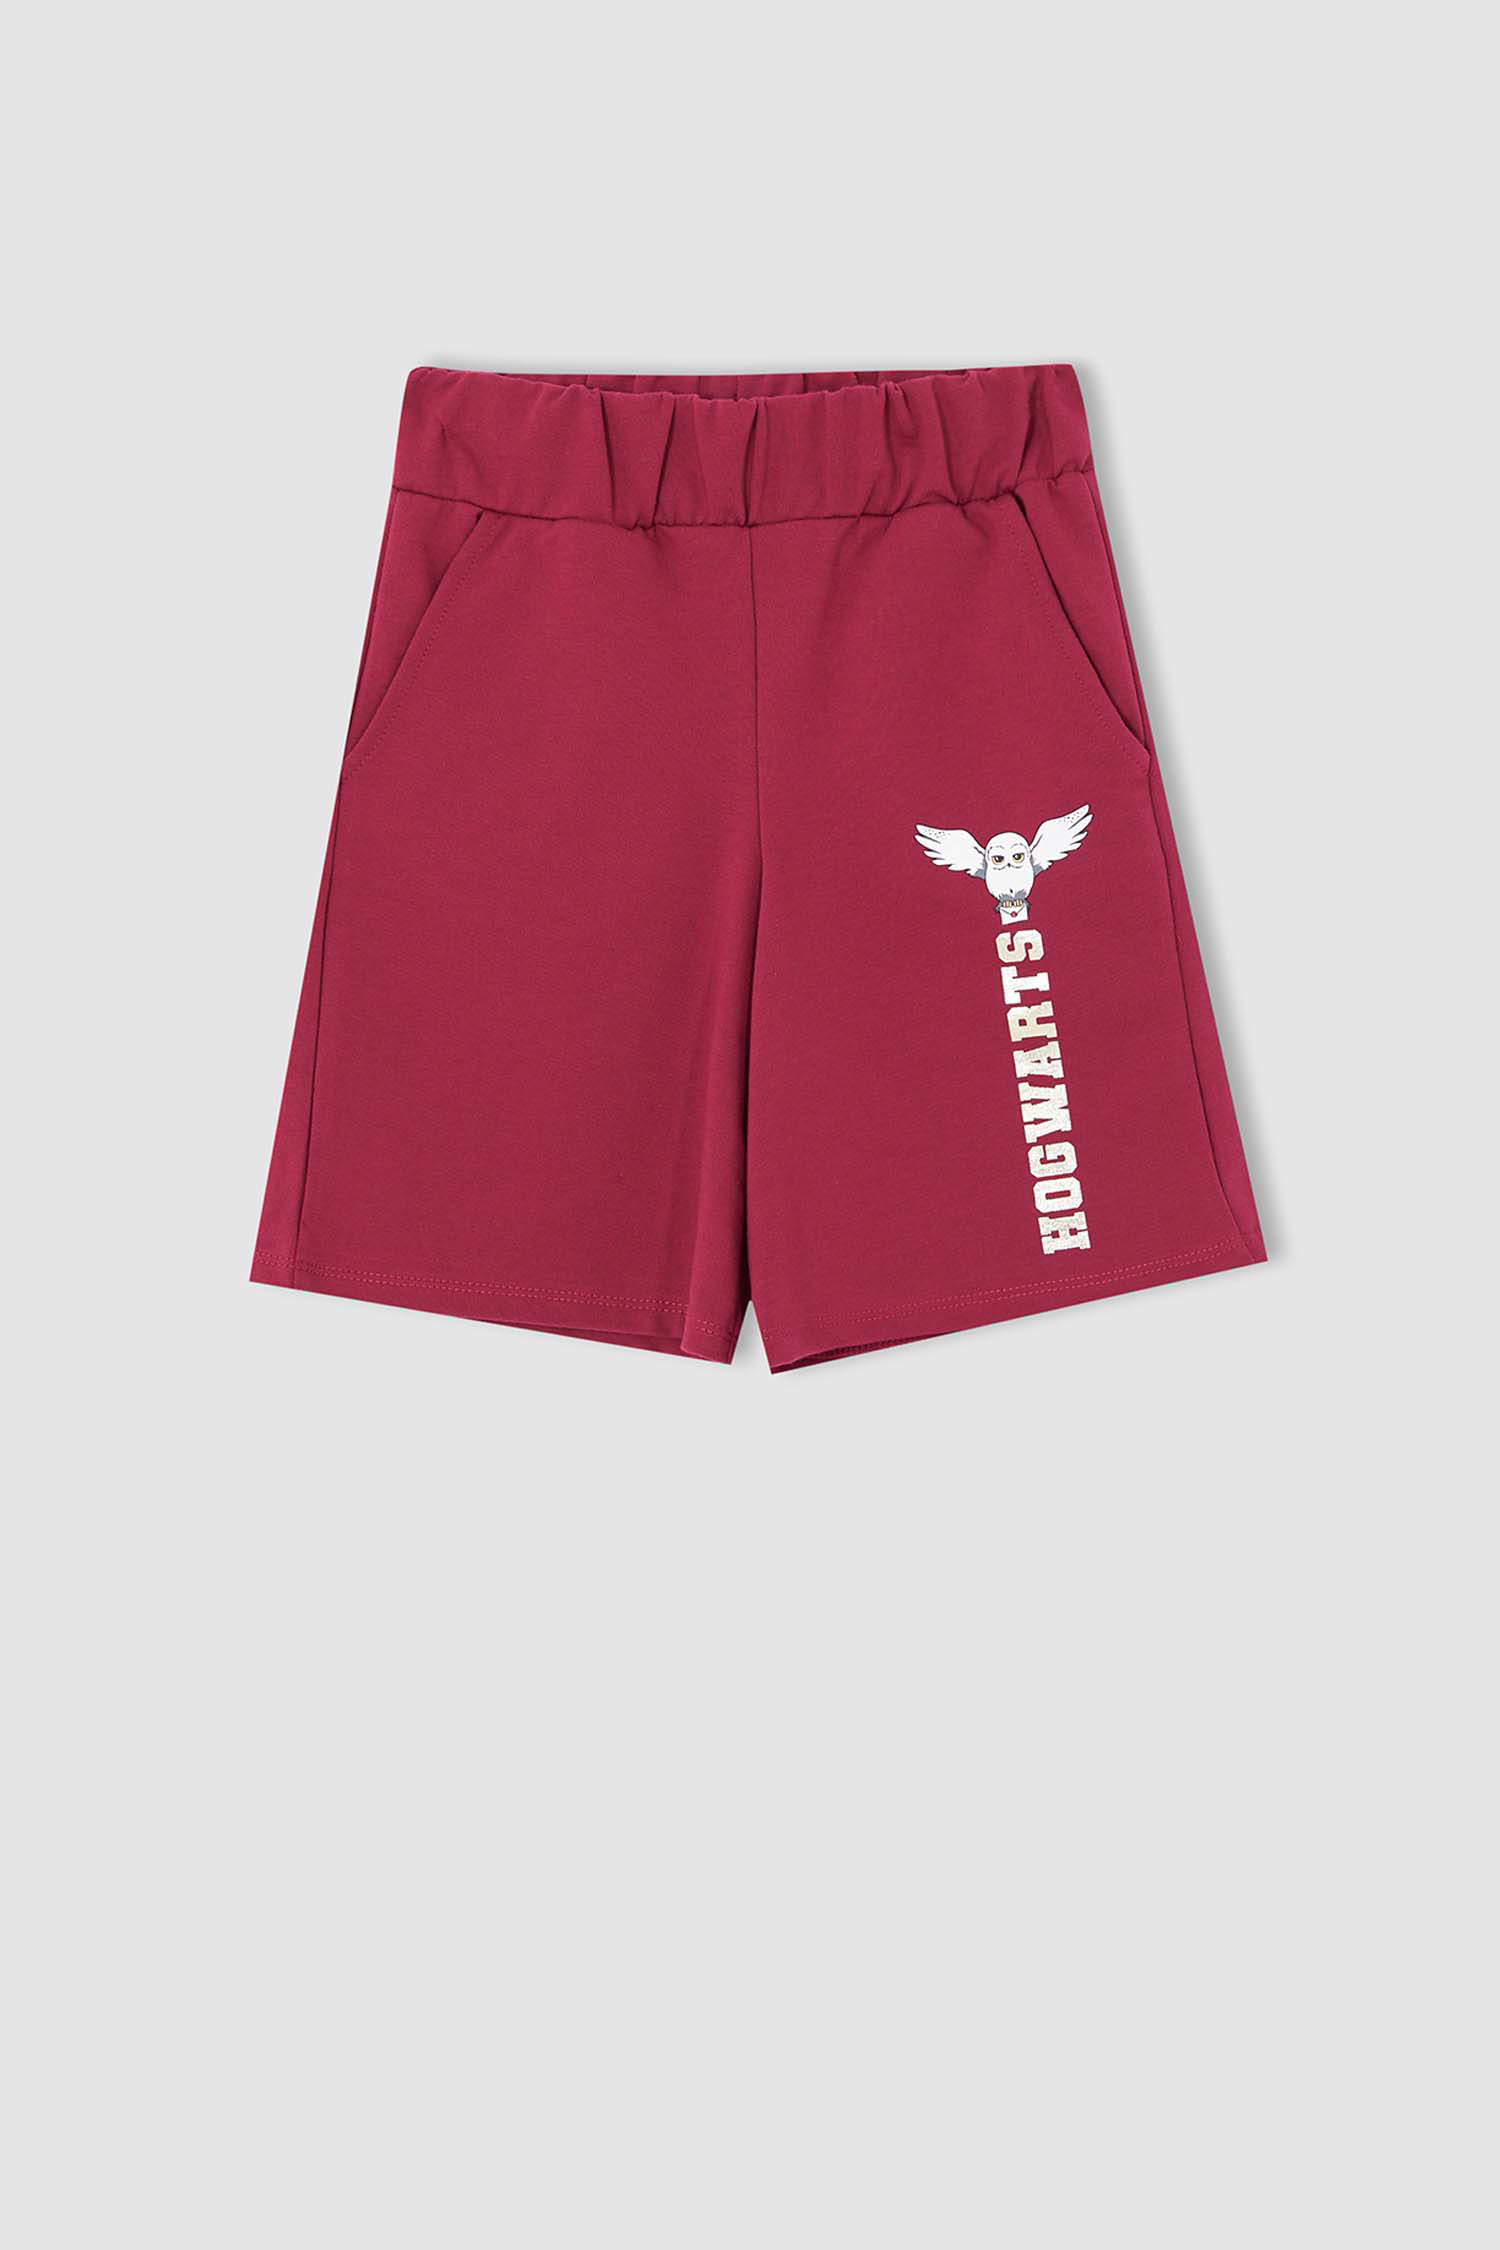 The Cutest Pink Shorts You've Ever Seen